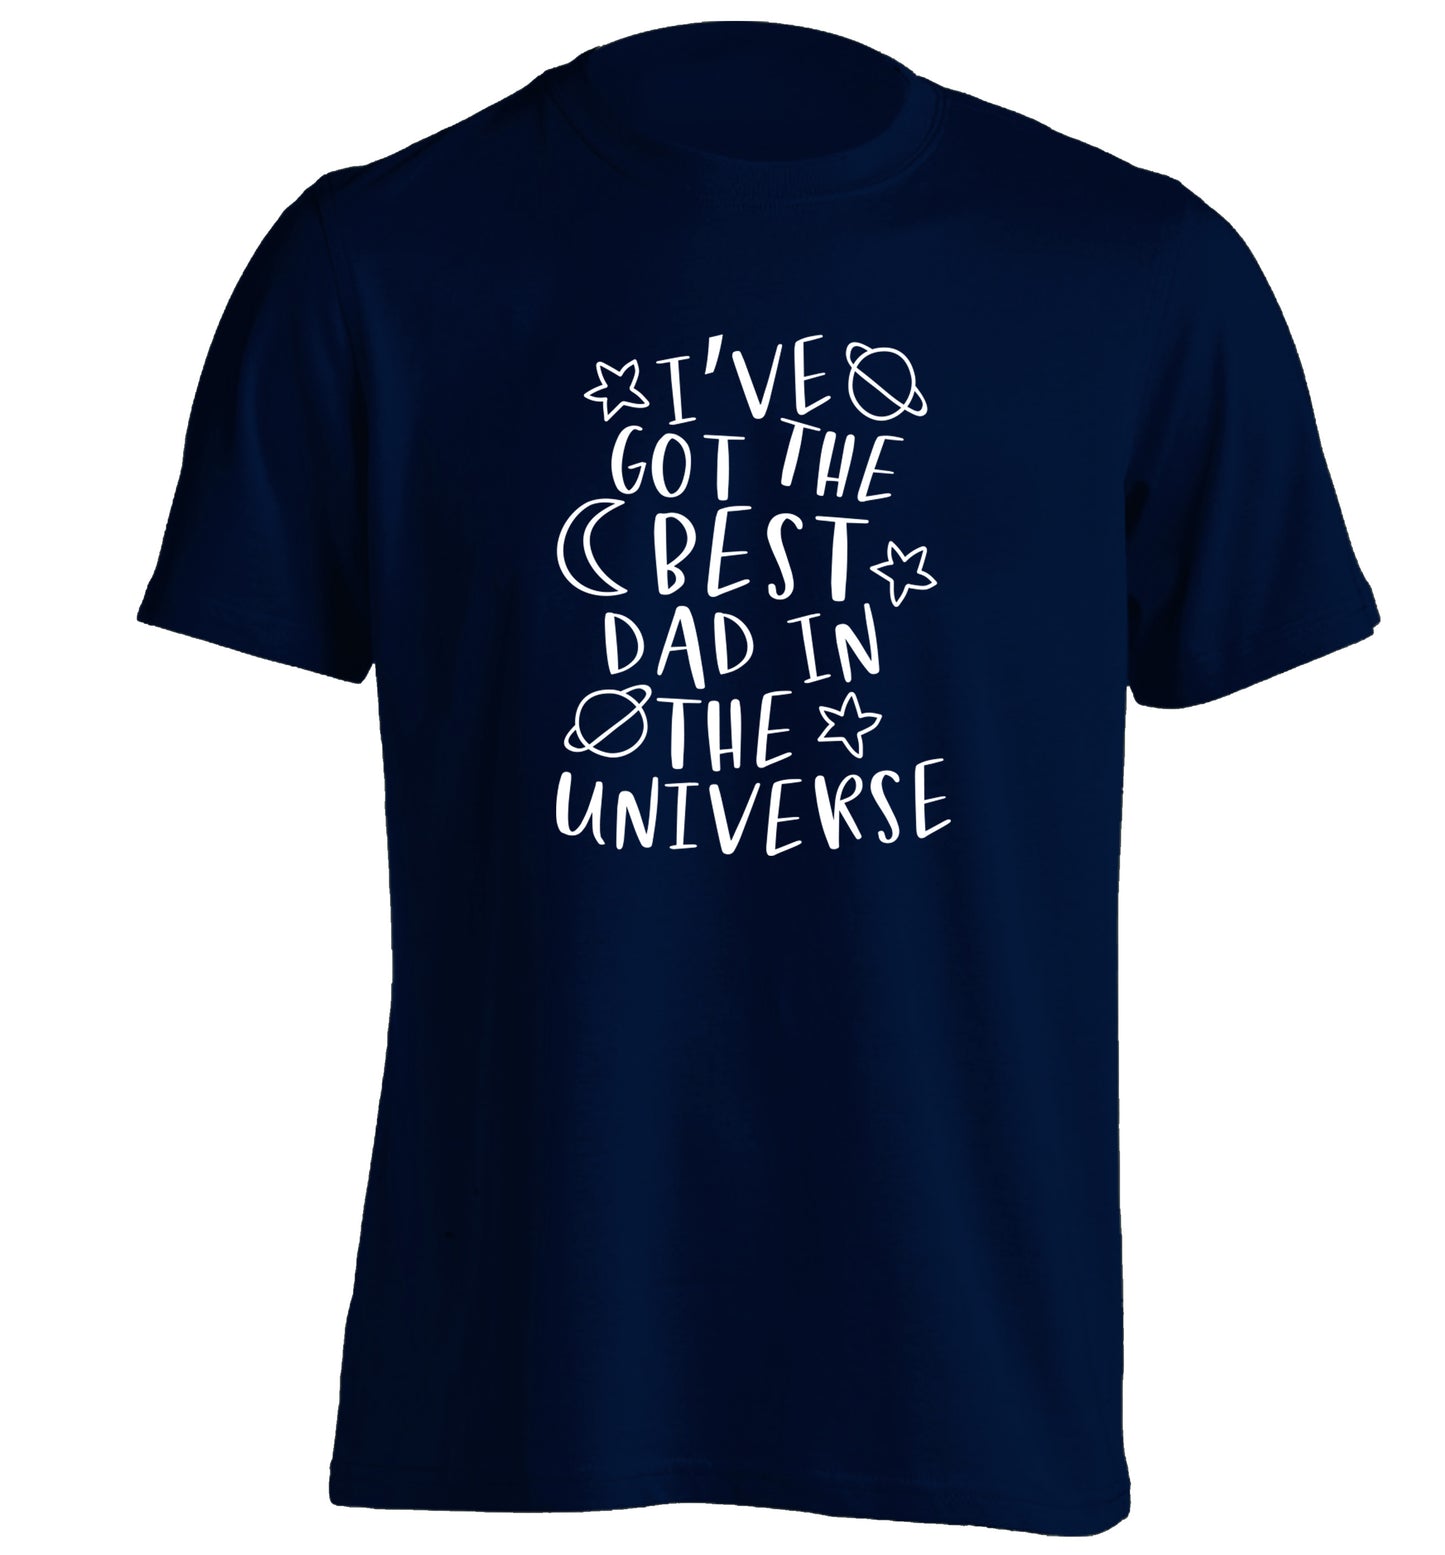 I've got the best dad in the universe adults unisex navy Tshirt 2XL